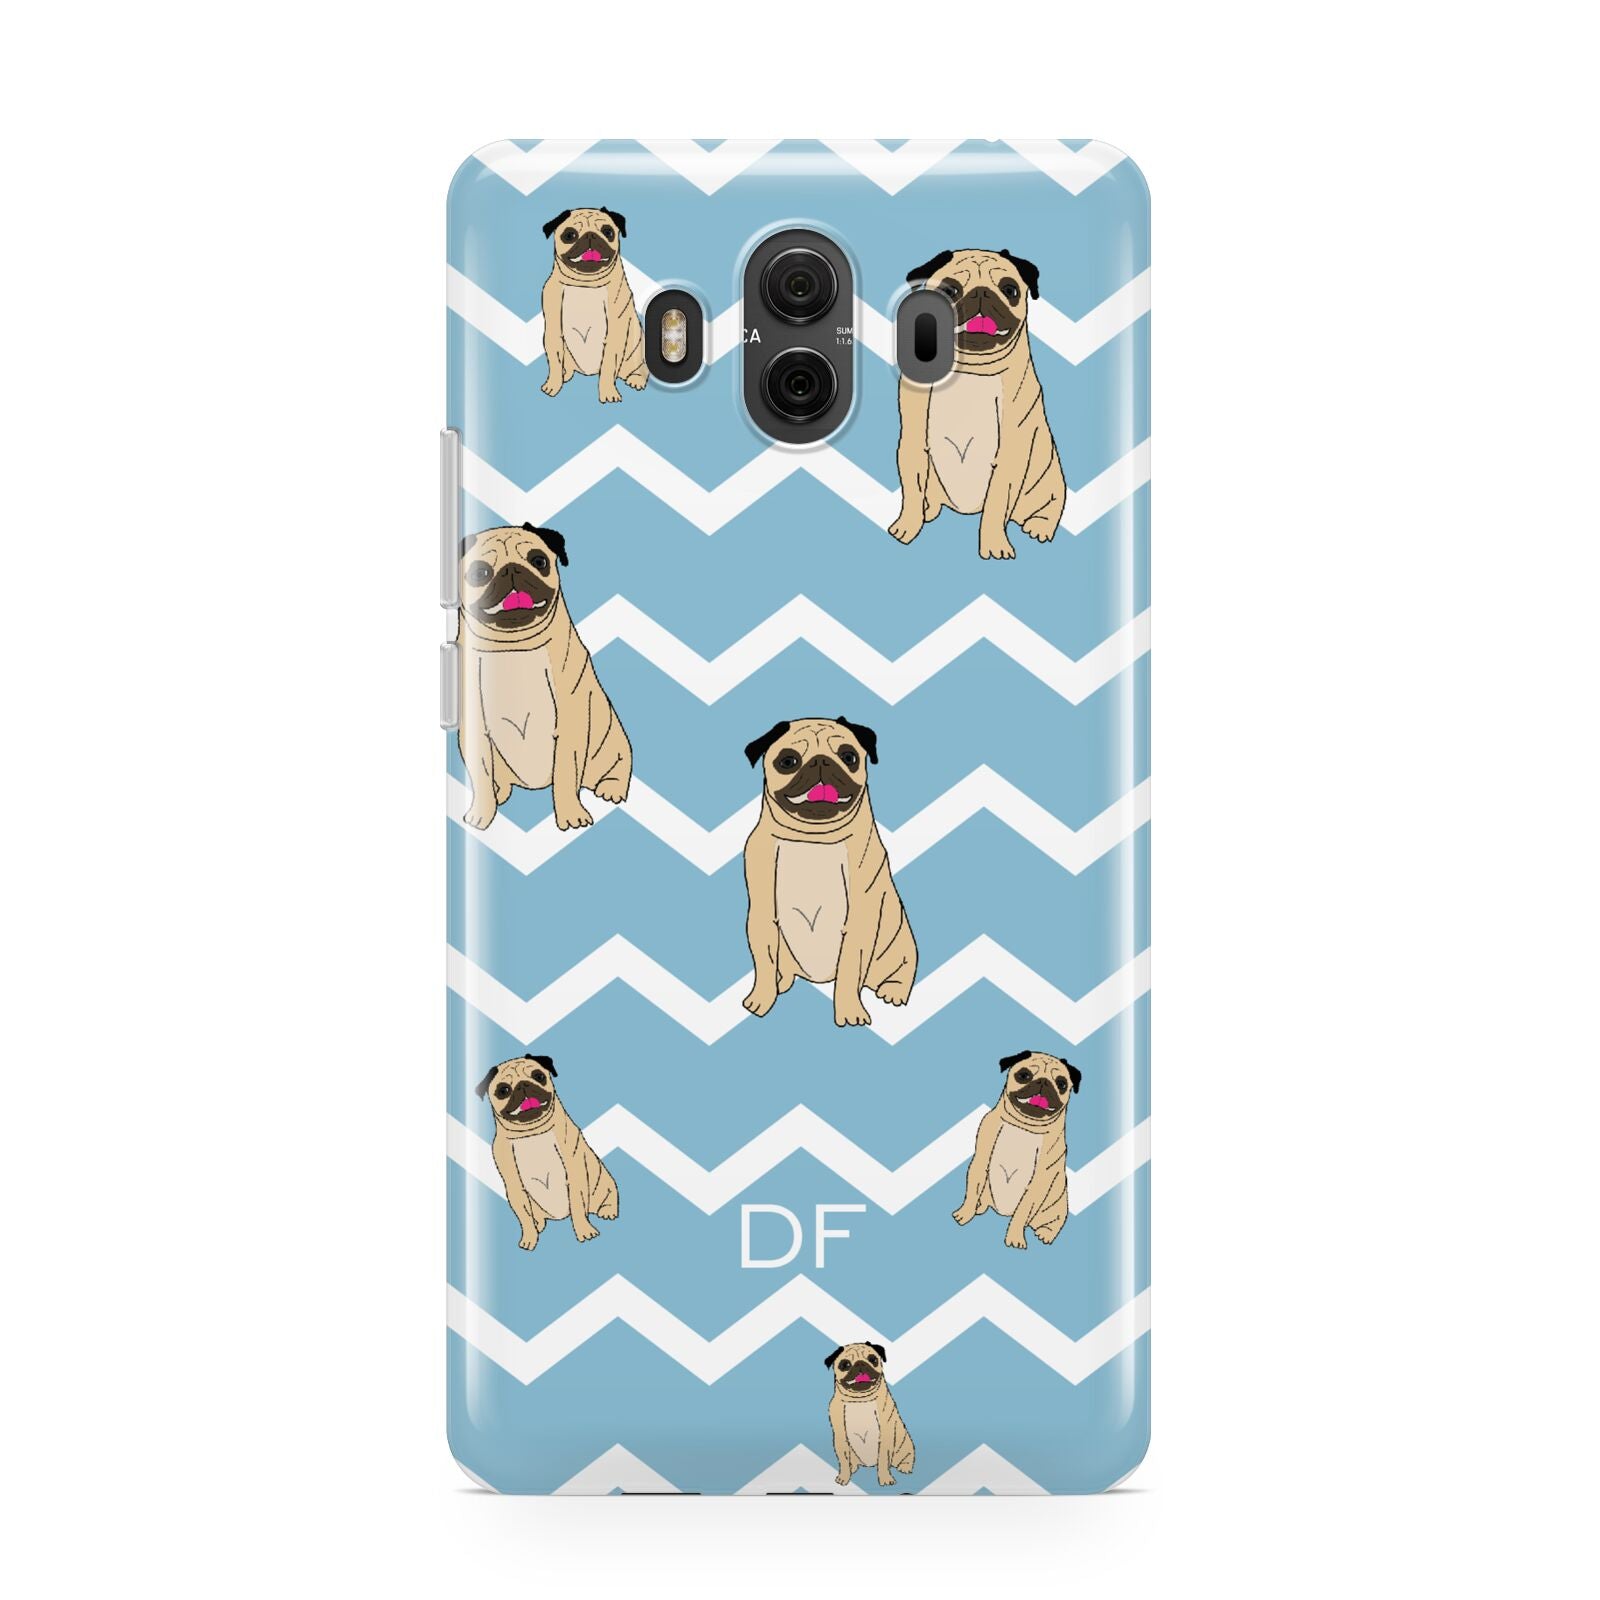 Personalised Pug Initials Huawei Mate 10 Protective Phone Case